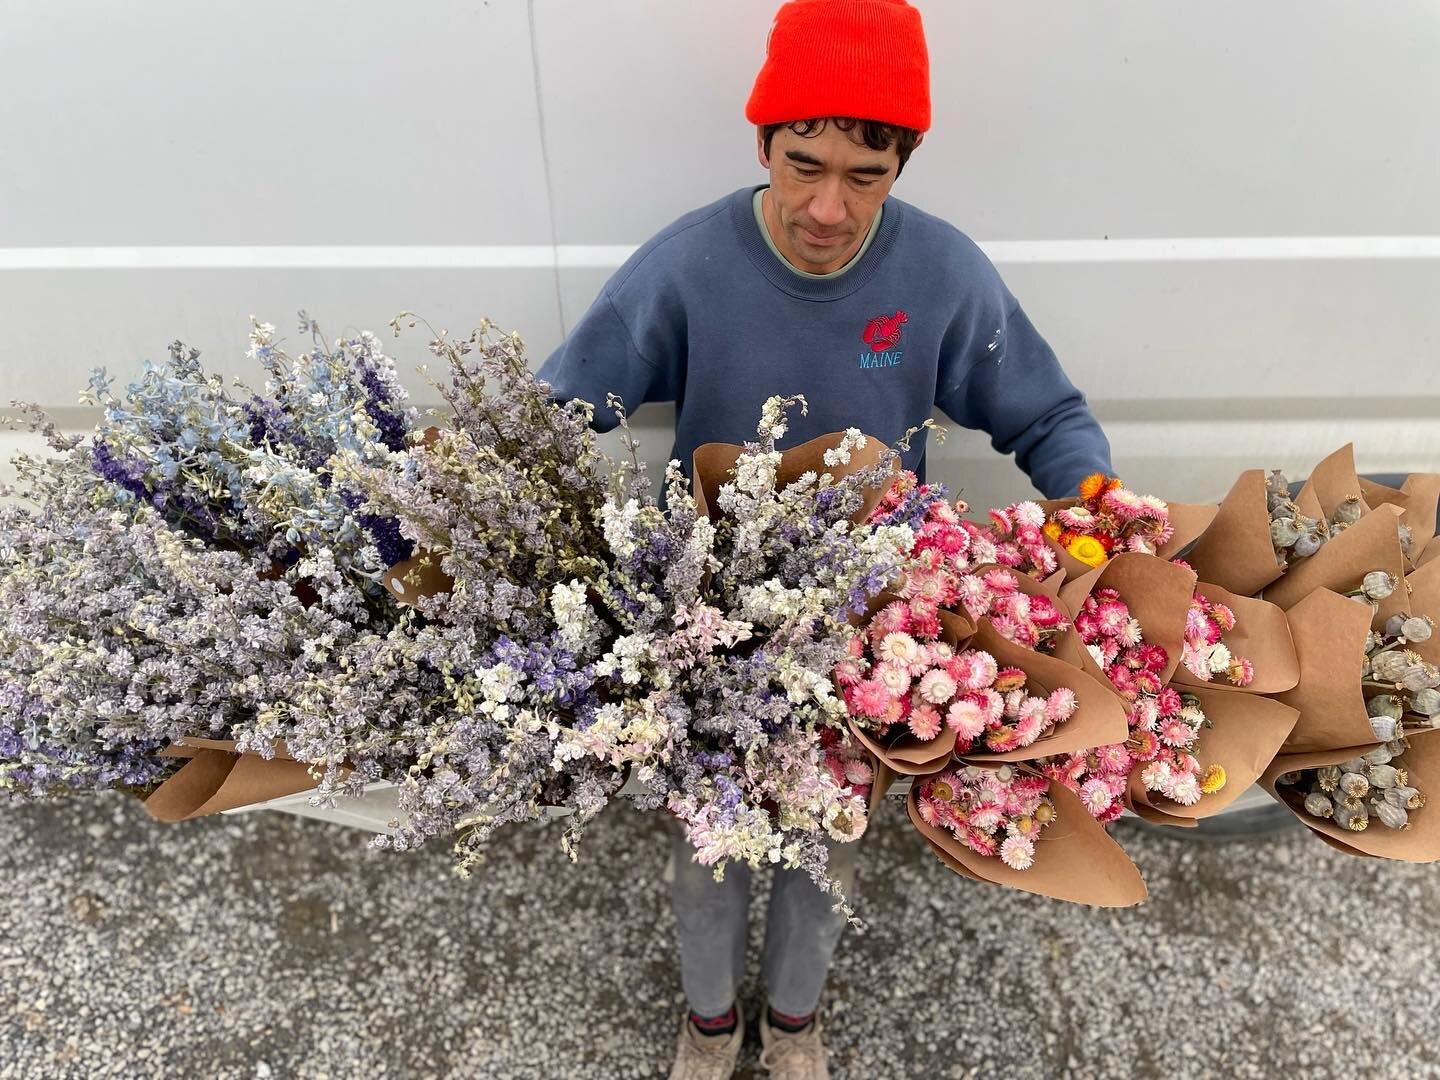 Saying goodbye sucks. The last of our dried and fresh flowers are heading to @middlebury_coop for the weekend and then our selling season is done for the year. So if you want to have local flowers for next weeks celebration now is the time to stock u